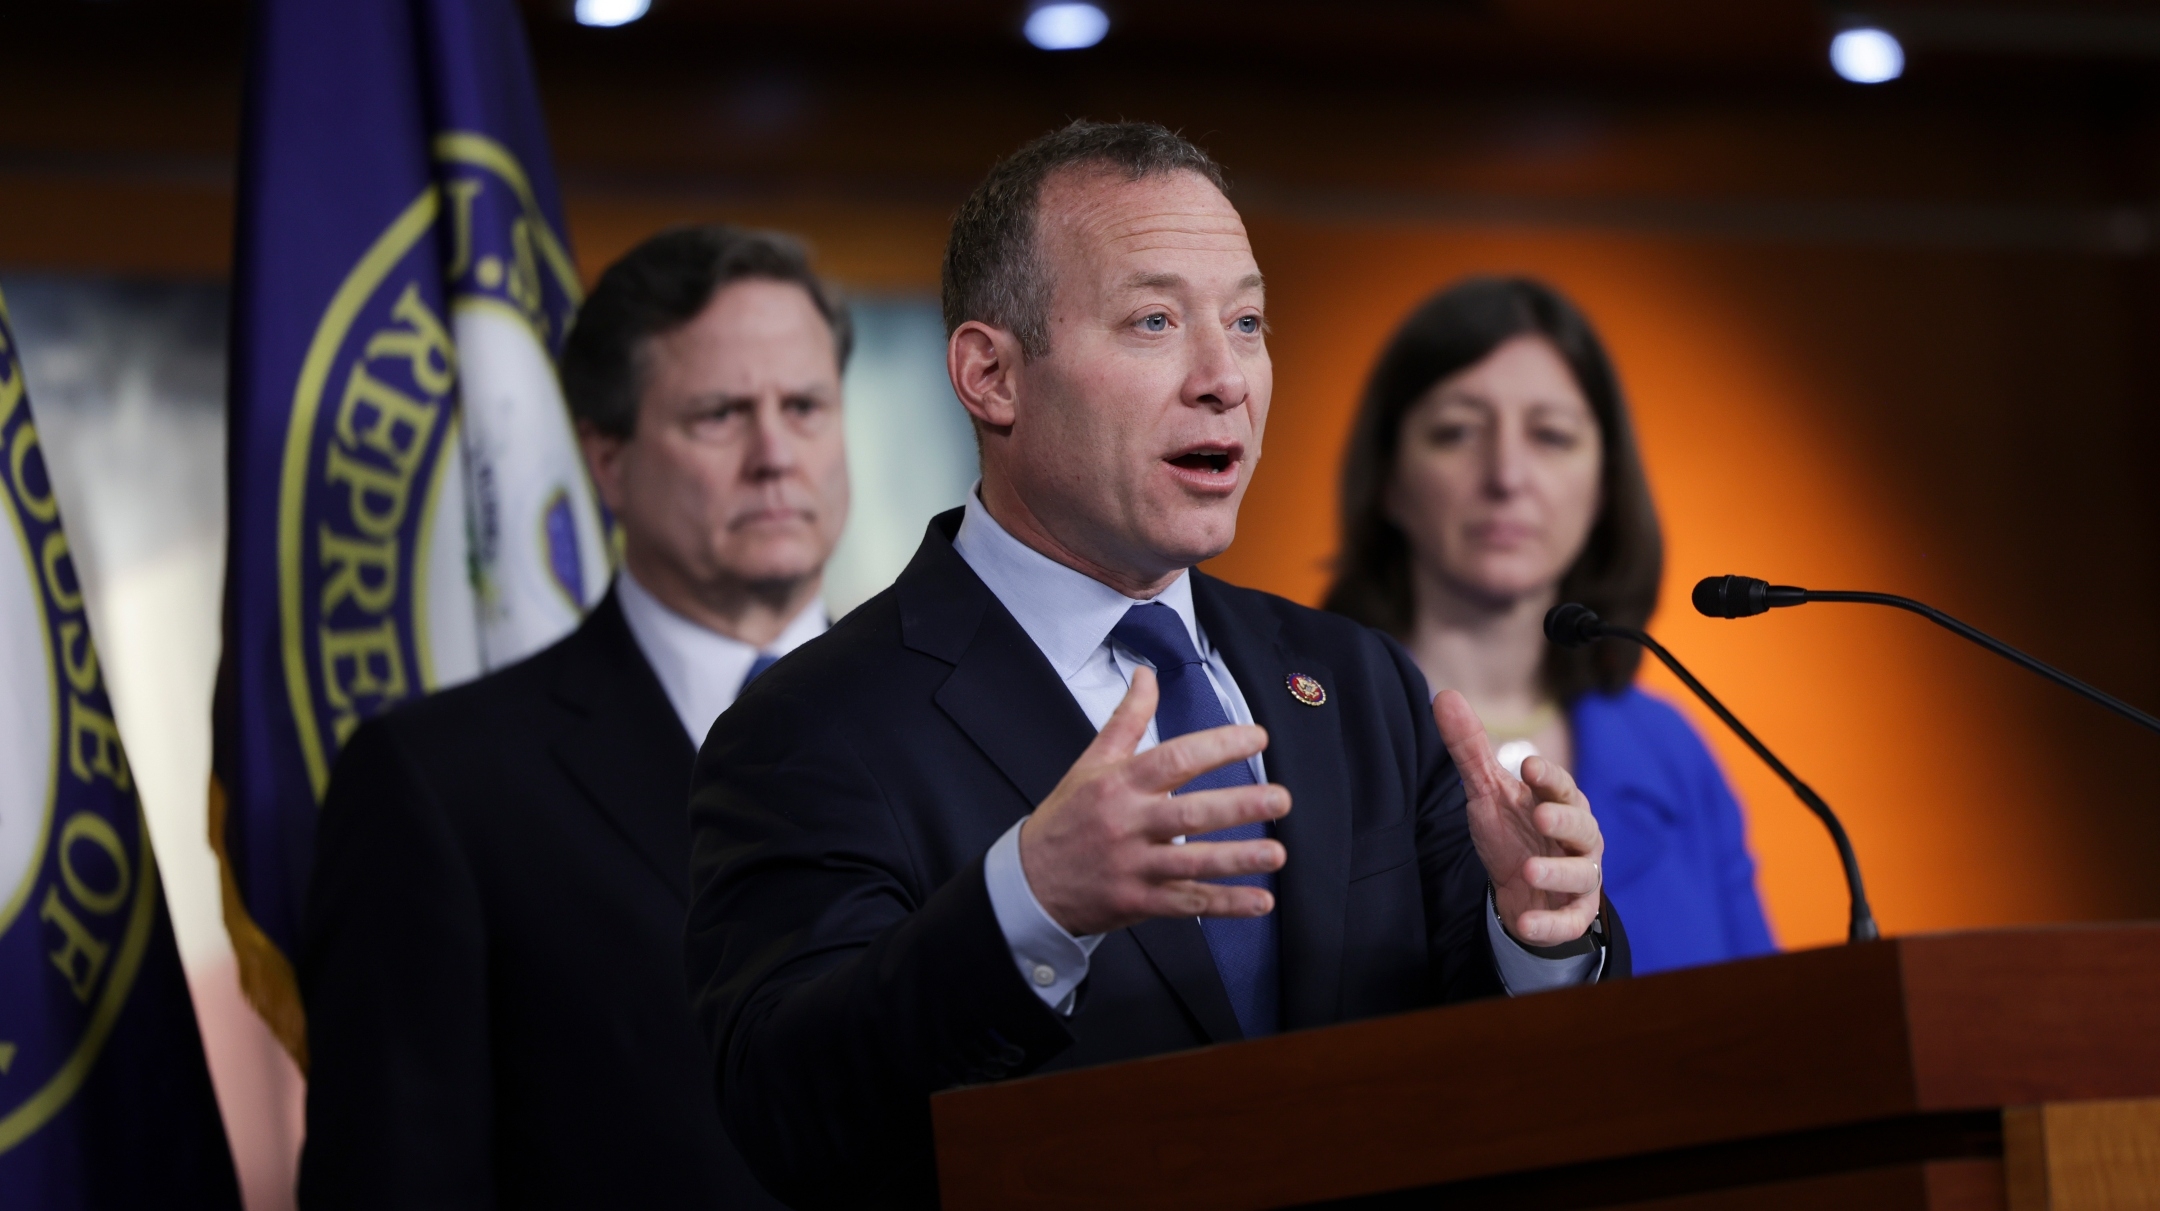 Rep. Josh Gottheimer, a New Jersey Democrat, speaks on Iran negotiations as Elaine Luria, a Virginia Democrat, and Donald Norcross, a New Jersey Democrat, look on at a news conference on Capitol Hill, April 6, 2022. (Kevin Dietsch/Getty Images)